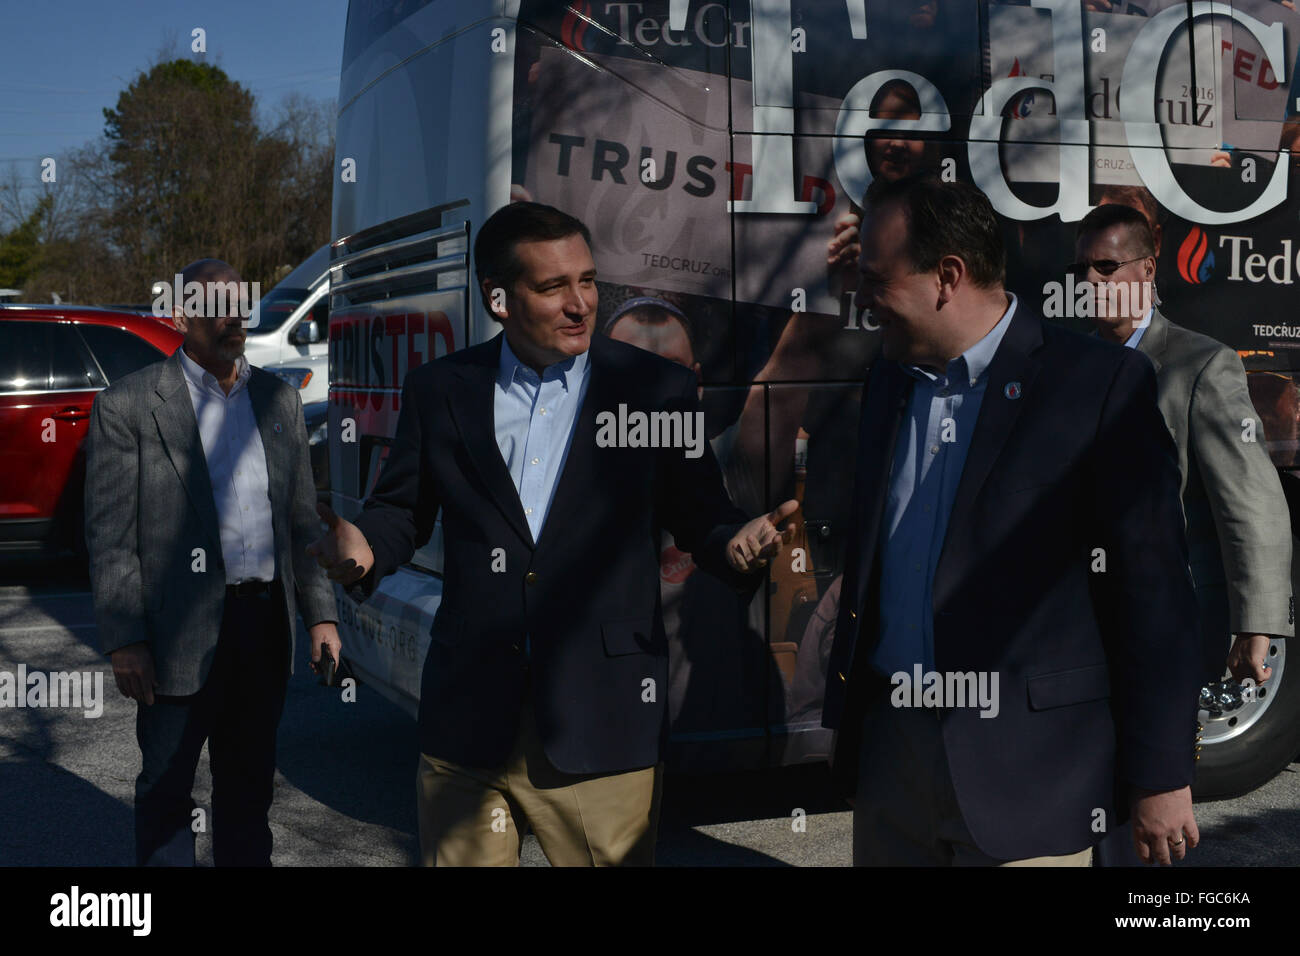 Easley, South Carolina, US. 18th Feb, 2016. TED CRUZ arrives at Mutts Barbecue to addres a rally Thursday, ahead of the South Carolina primary Saturday. © Miguel Juarez Lugo/ZUMA Wire/Alamy Live News Stock Photo